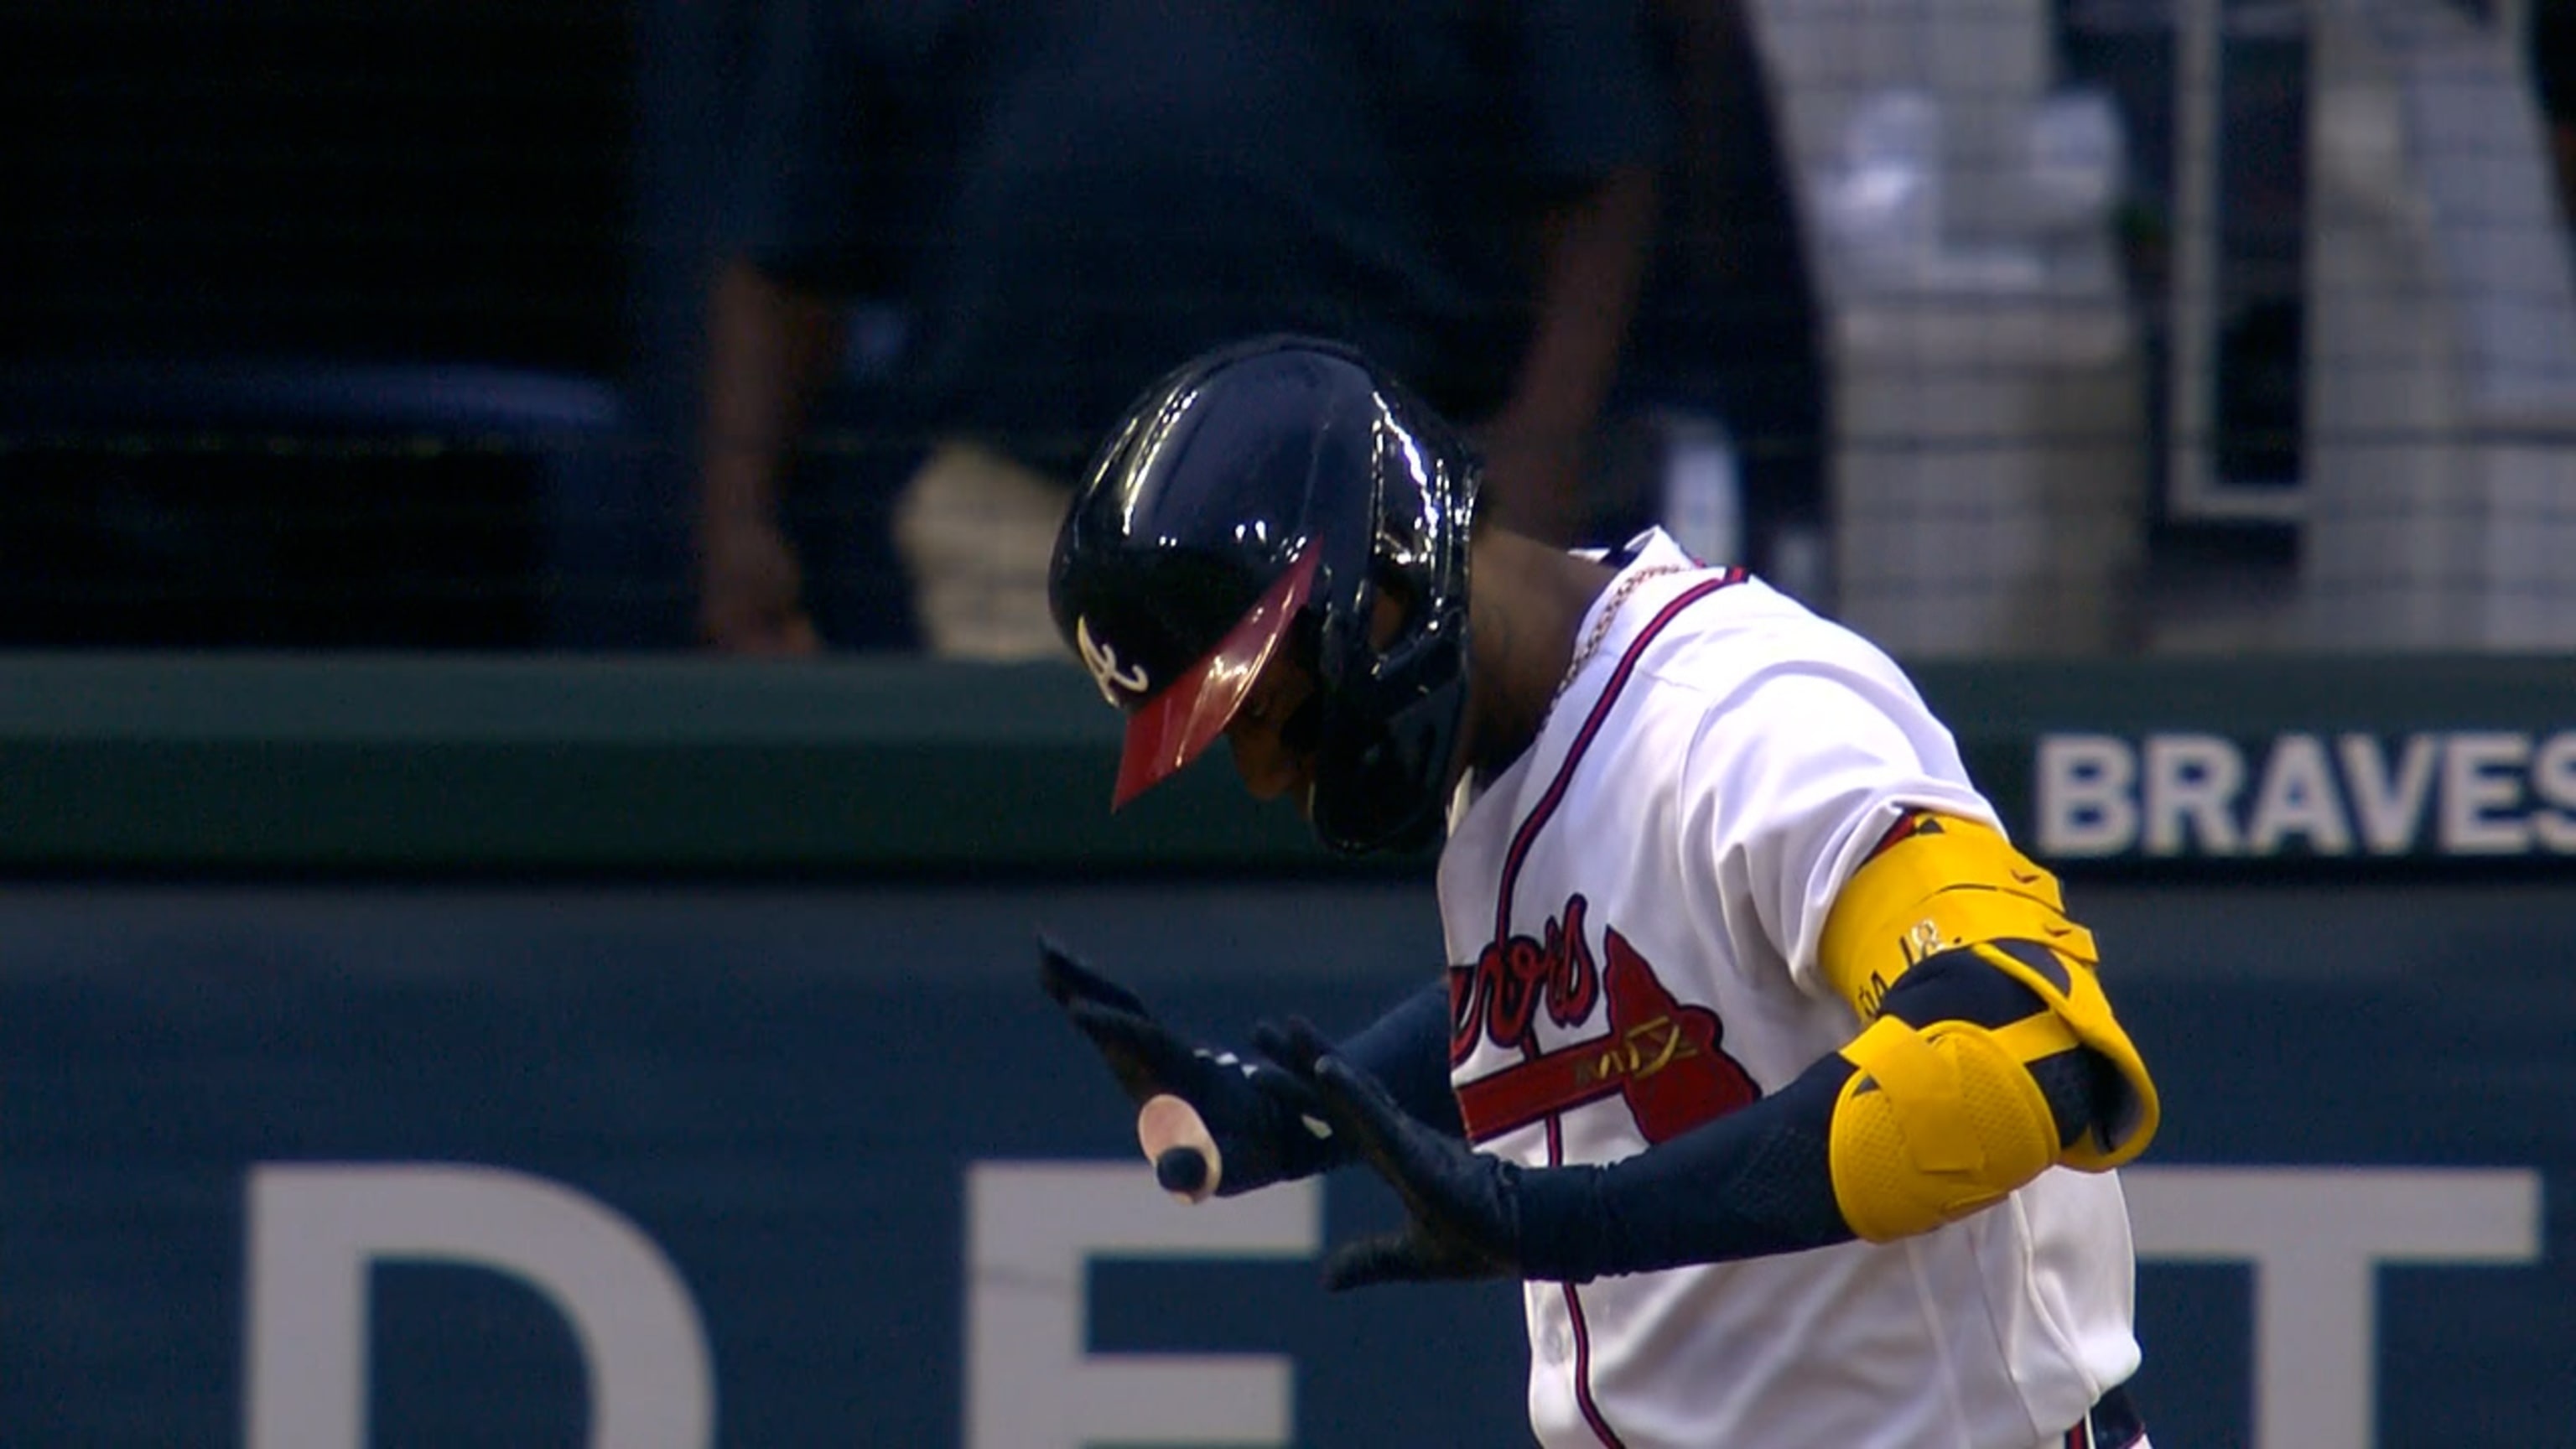 Braves' Ronald Acuña Jr. hit on the left elbow by a pitch, leaves game;  X-rays negative